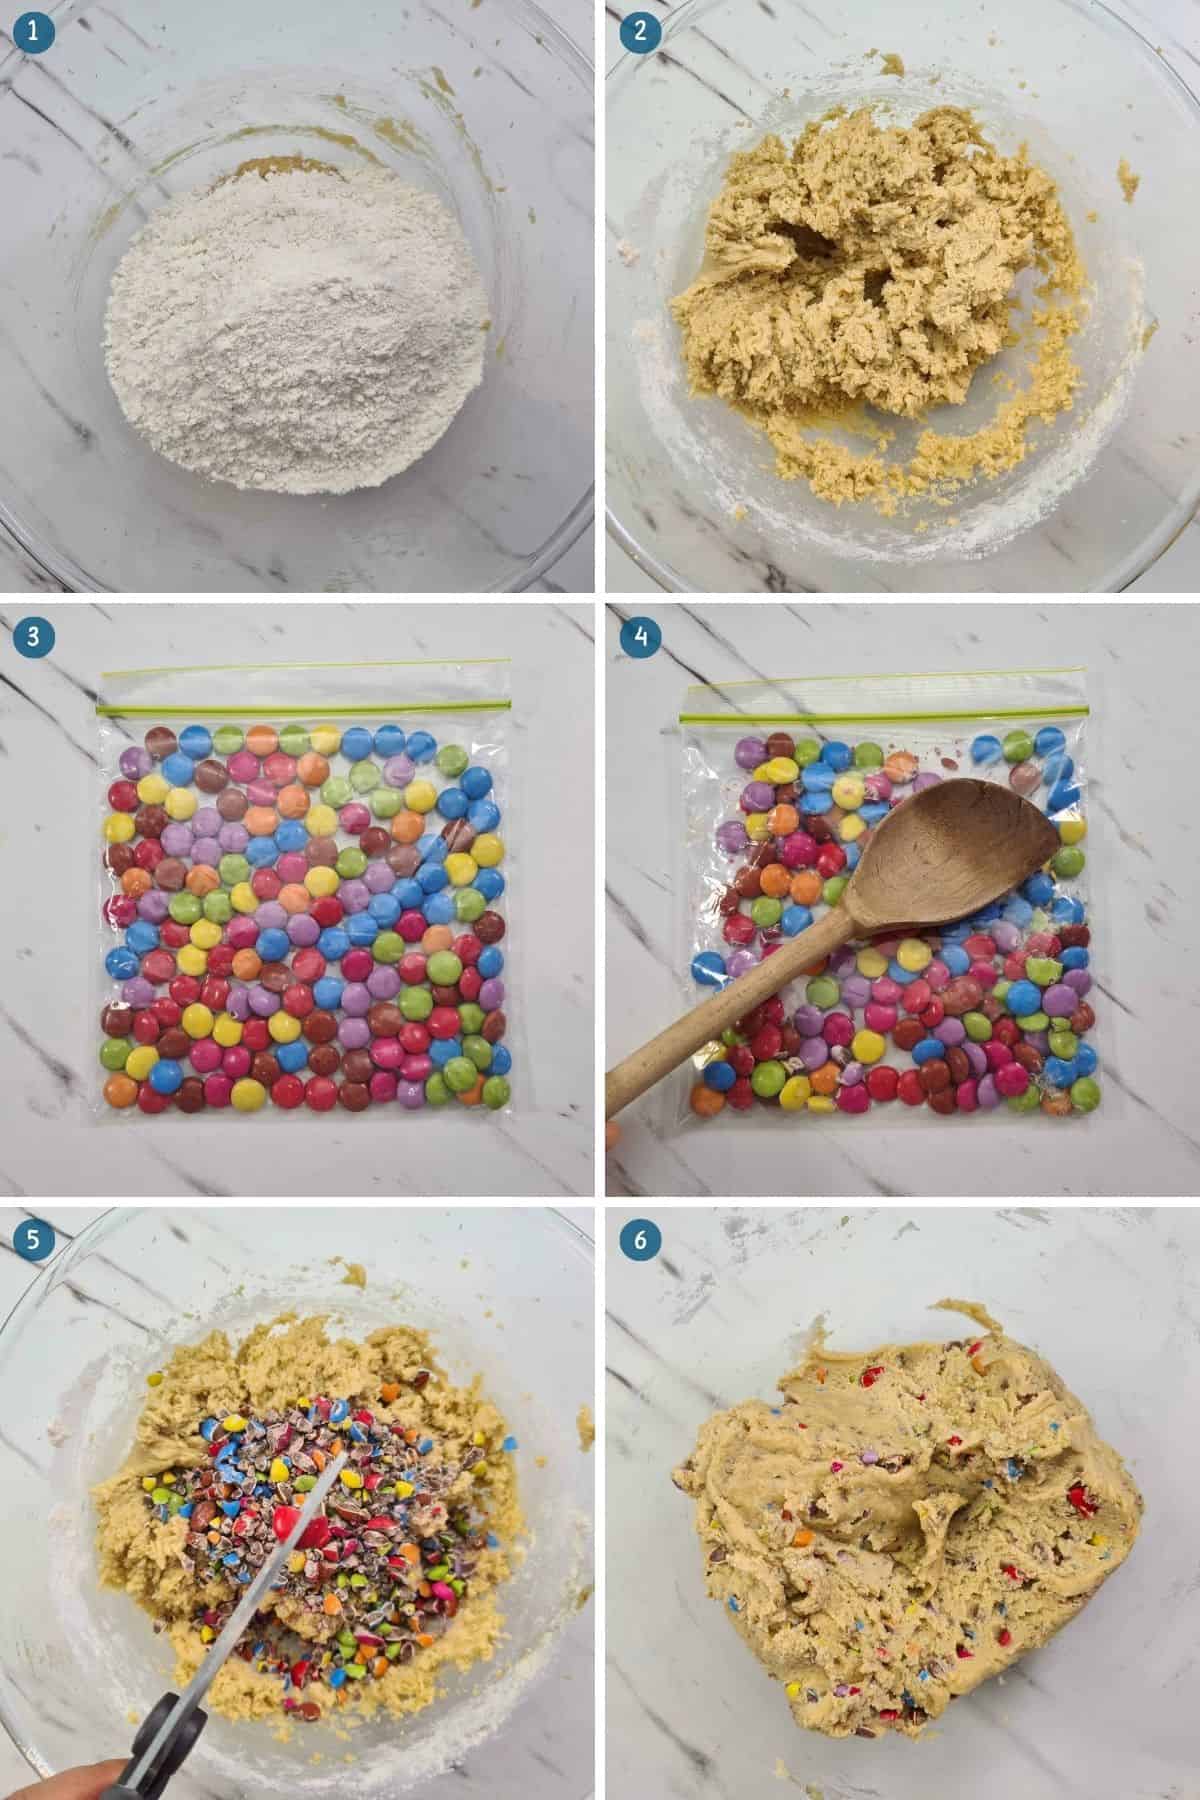 adding-the-dry-ingredients-and-smarties-for-smarties-cookies-recipe